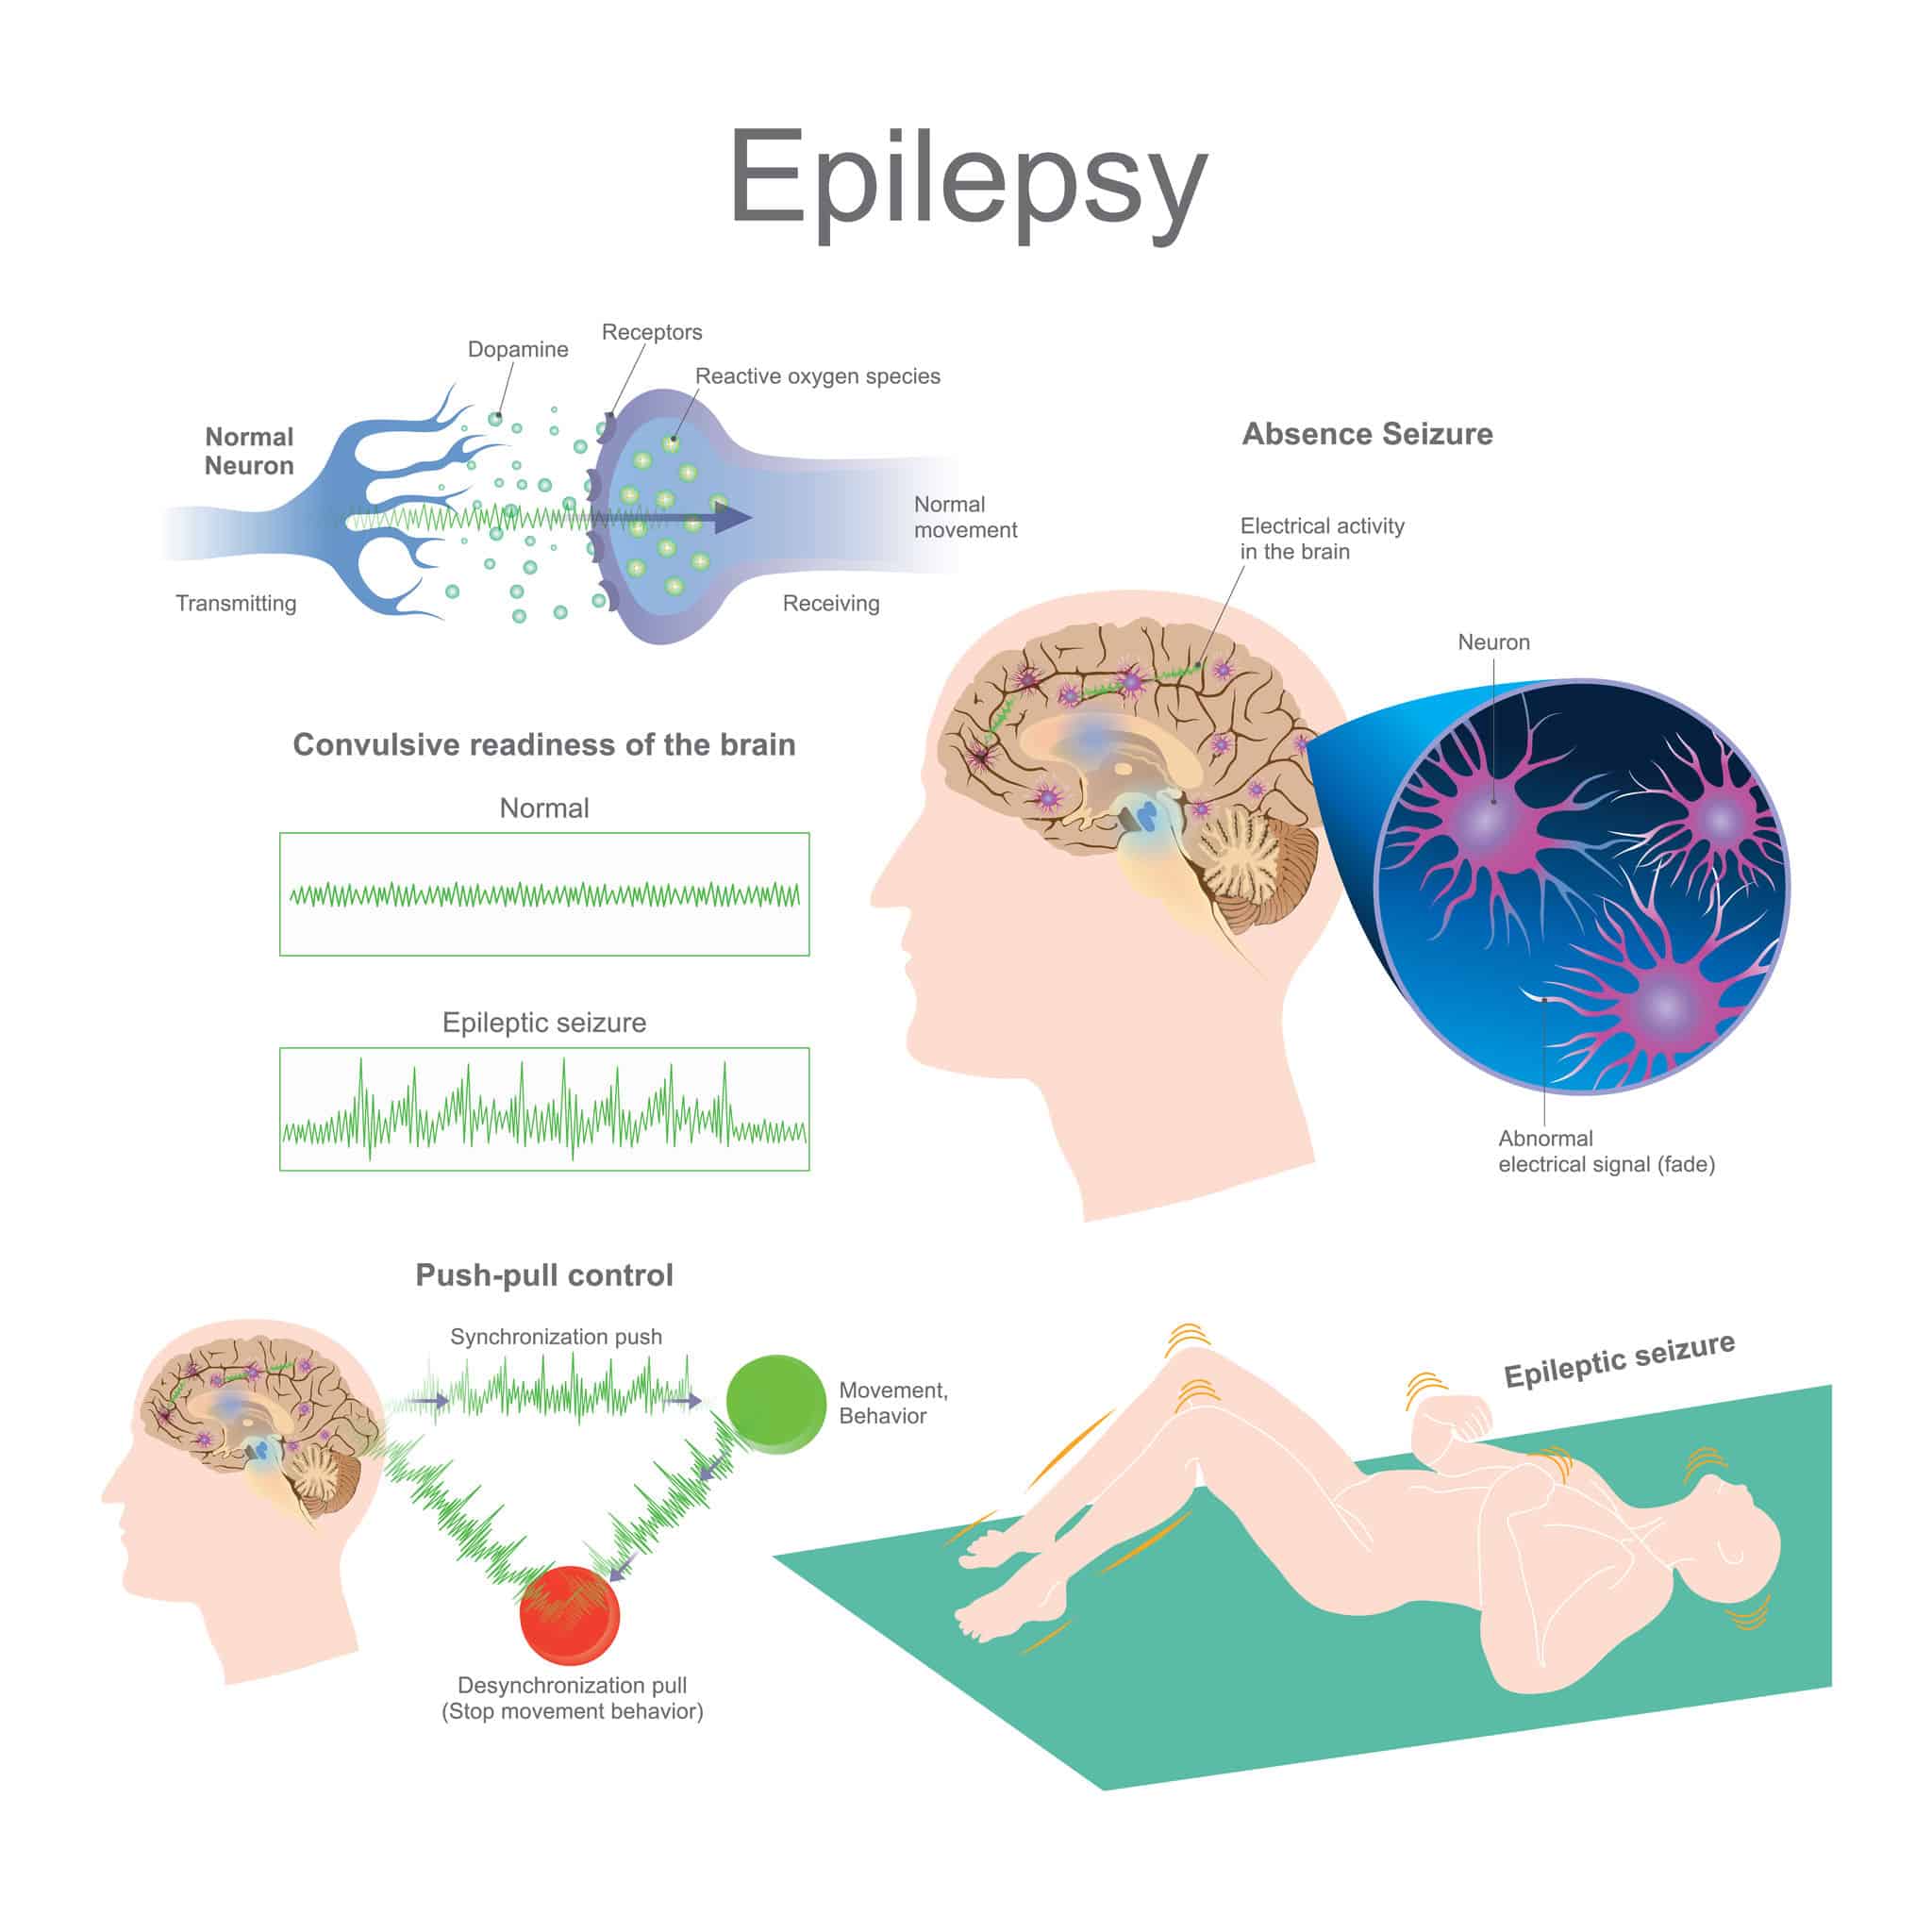 Can epilepsy be transmitted from one person to another?